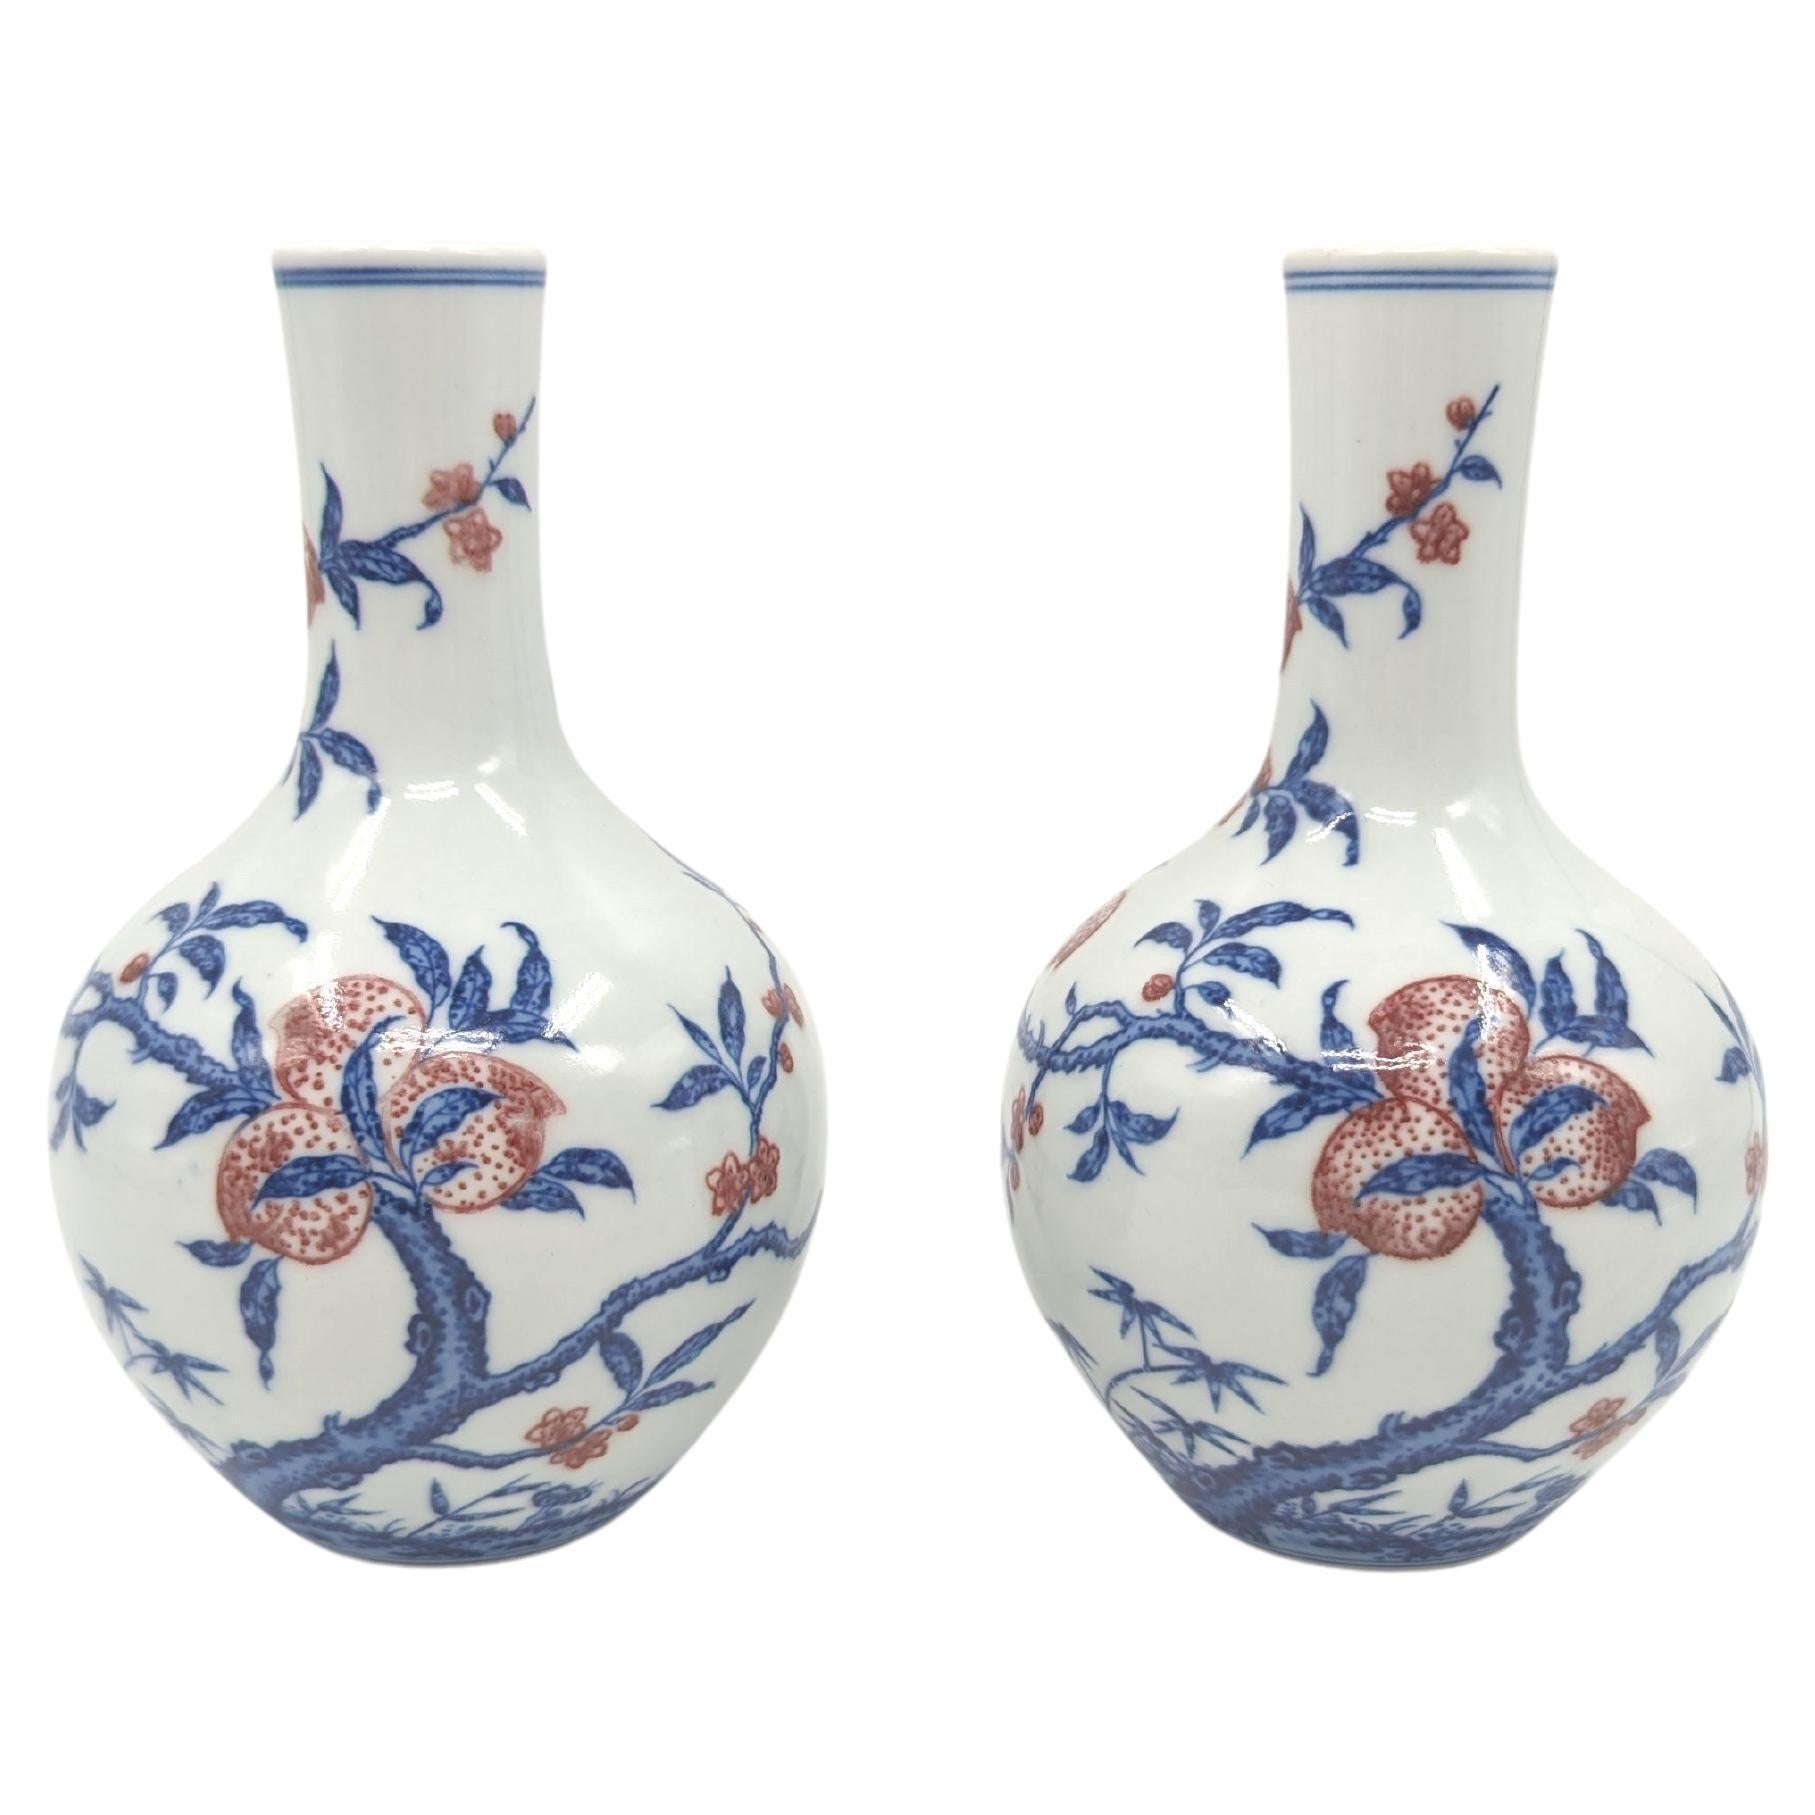 We present to you a remarkable pair of Chinese porcelain bottle vases, a true embodiment of the finesse and artistry that characterizes Chinese porcelain craftsmanship. These vases are very well potted, and hand-painted with meticulous precision,